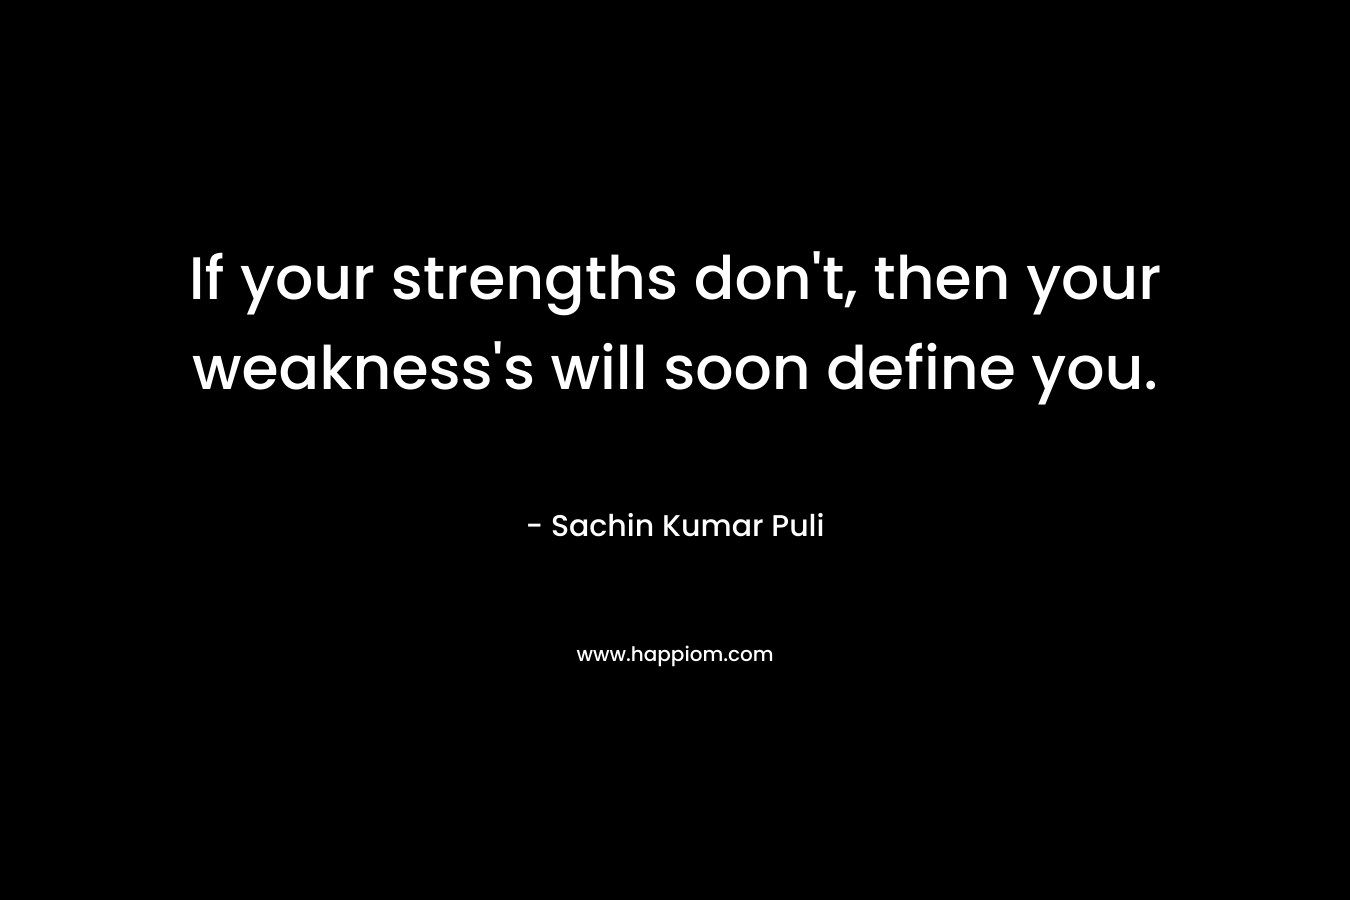 If your strengths don’t, then your weakness’s will soon define you. – Sachin Kumar Puli